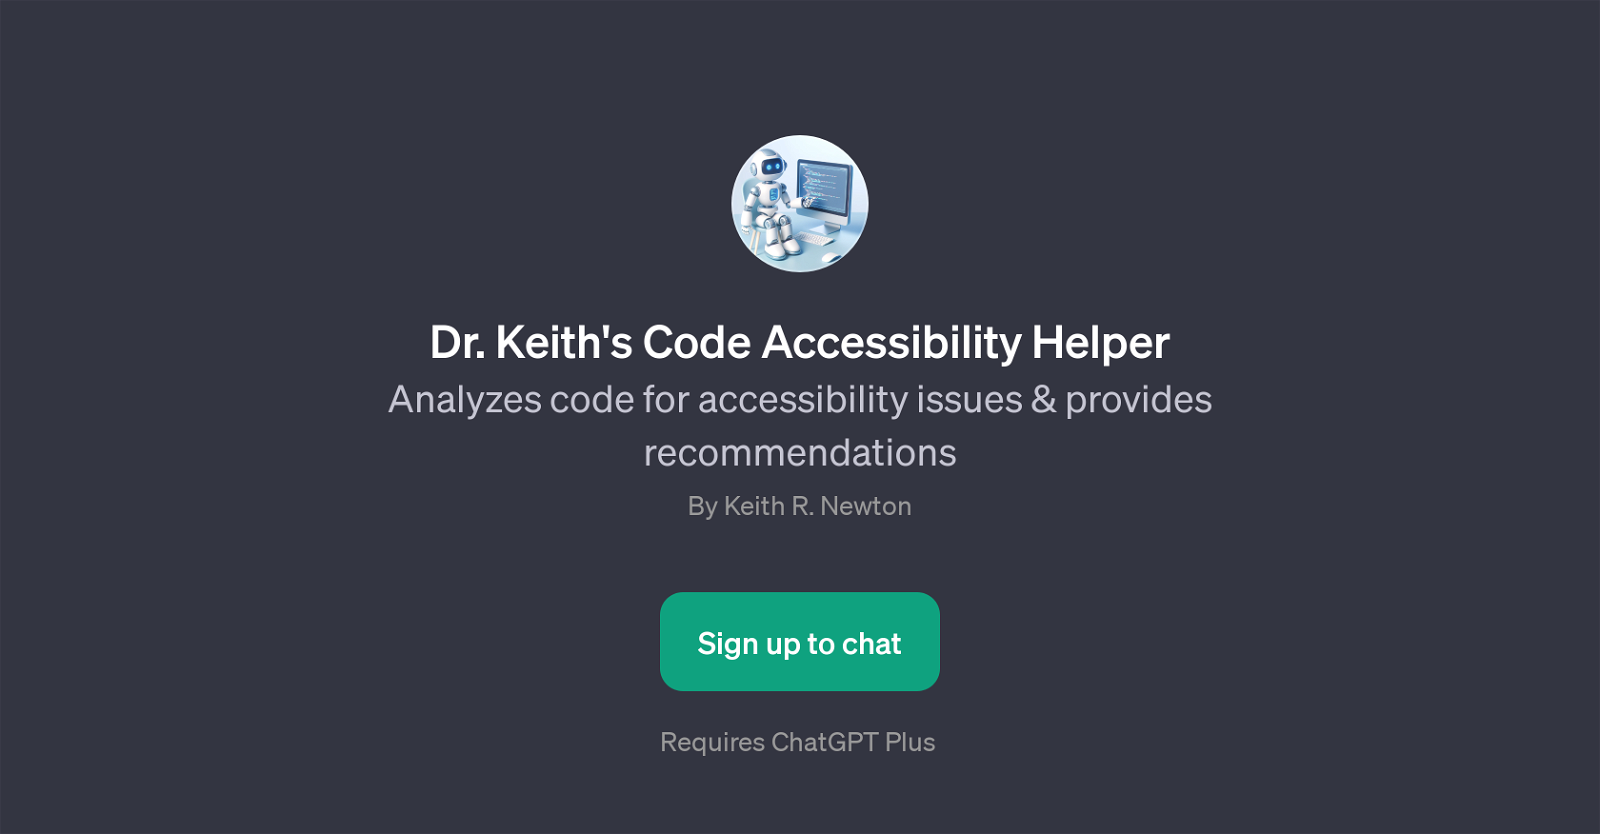 Dr. Keith's Code Accessibility Helper website